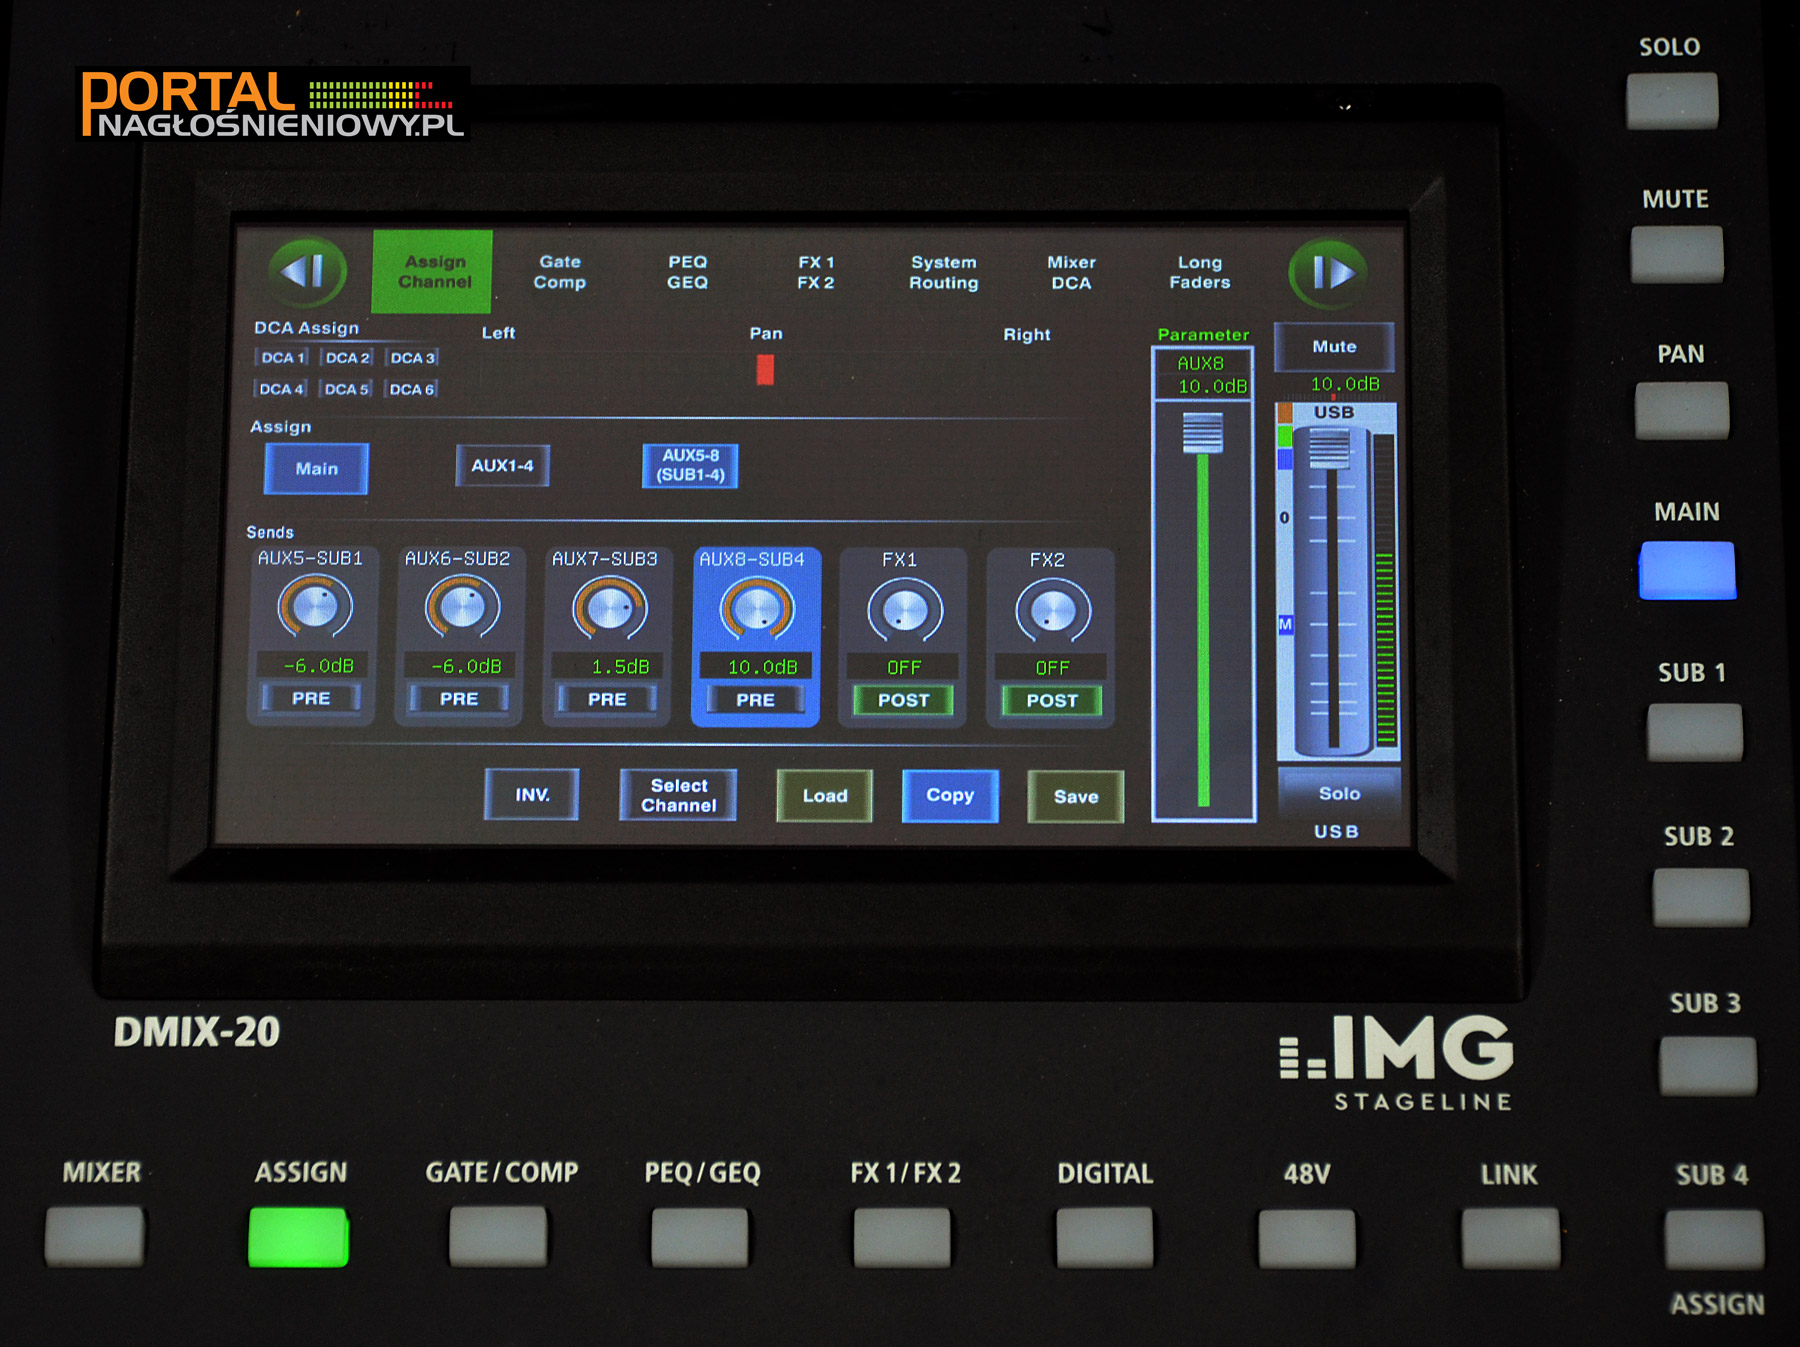 IMG-STAGELINE-DMIX-20-LCD-AUX-send8